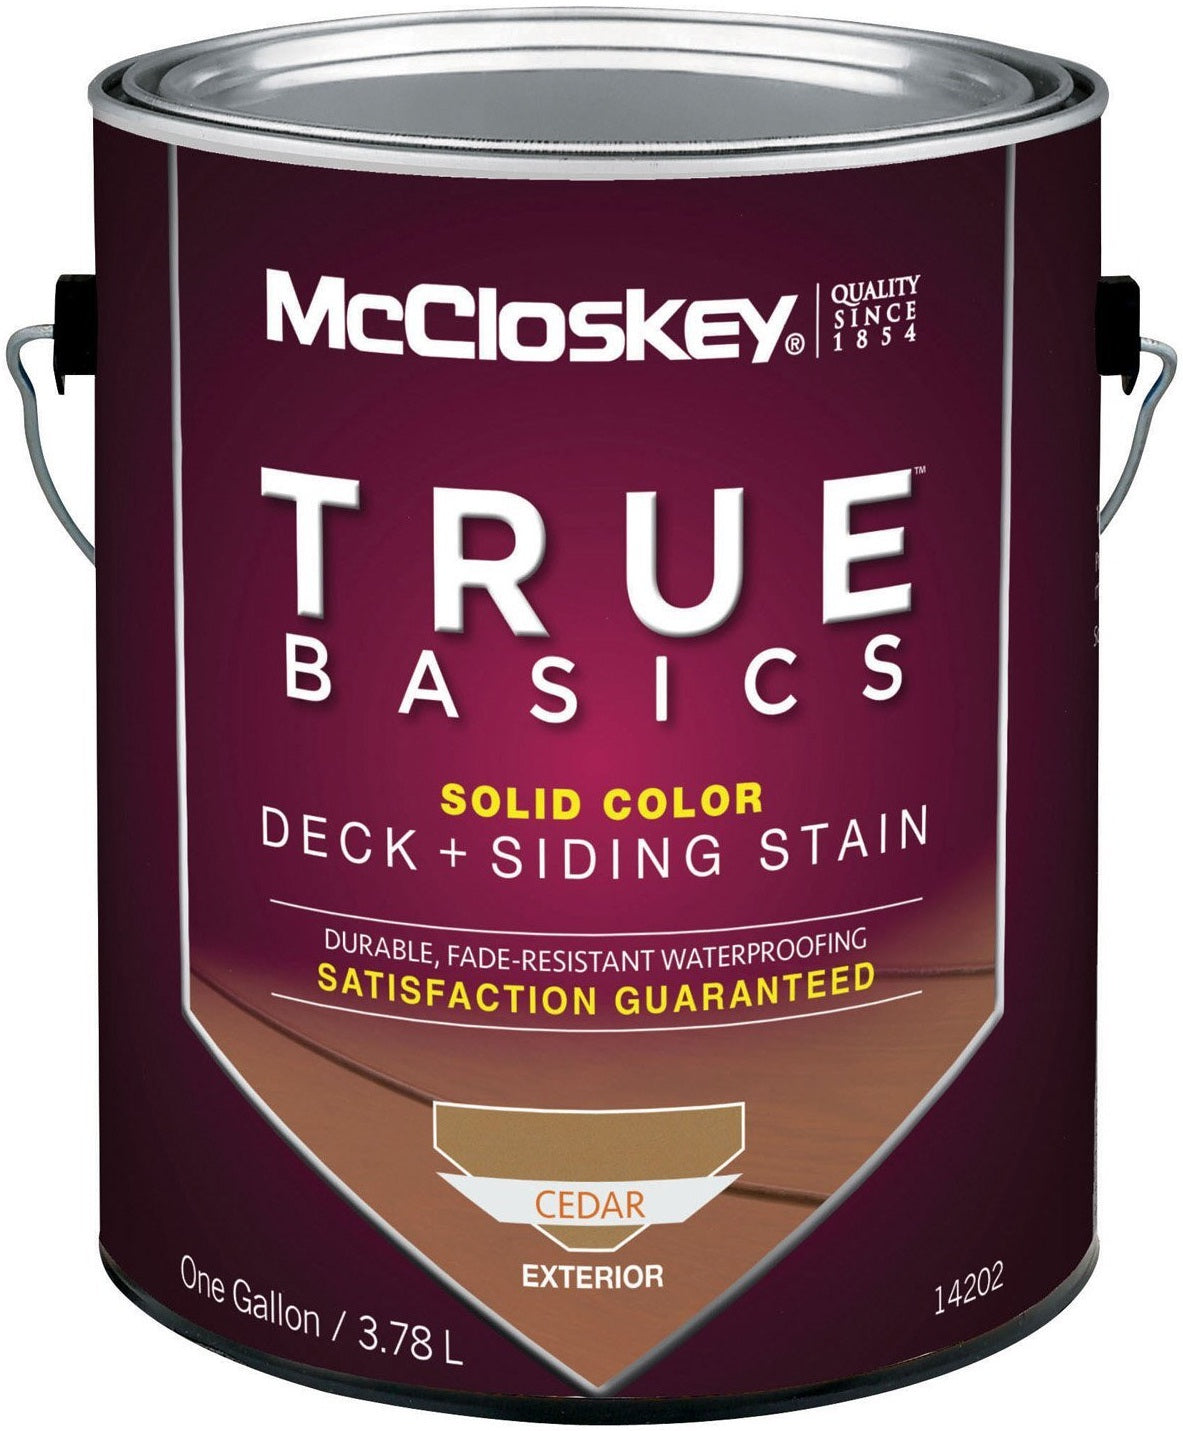 Buy mccloskey deck stain - Online store for exterior stains & finishes, solid in USA, on sale, low price, discount deals, coupon code